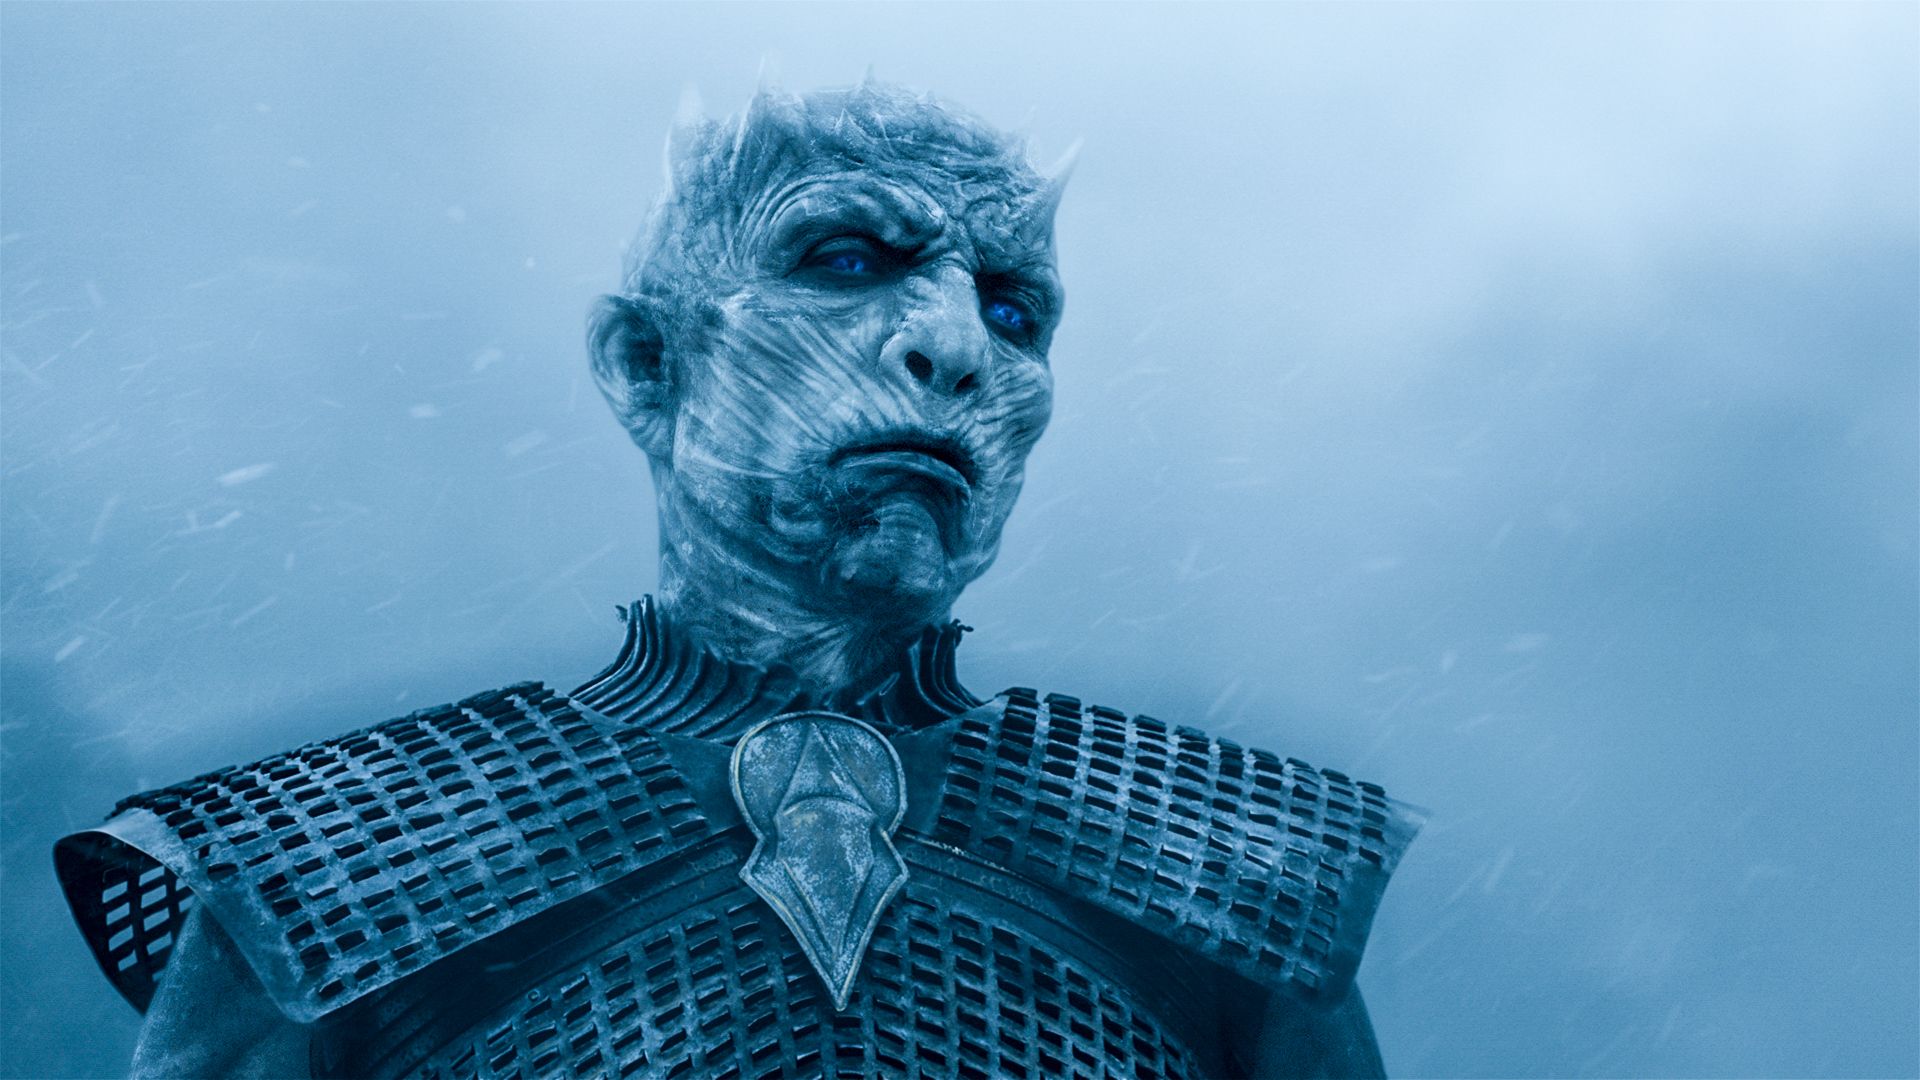 Image result for night king